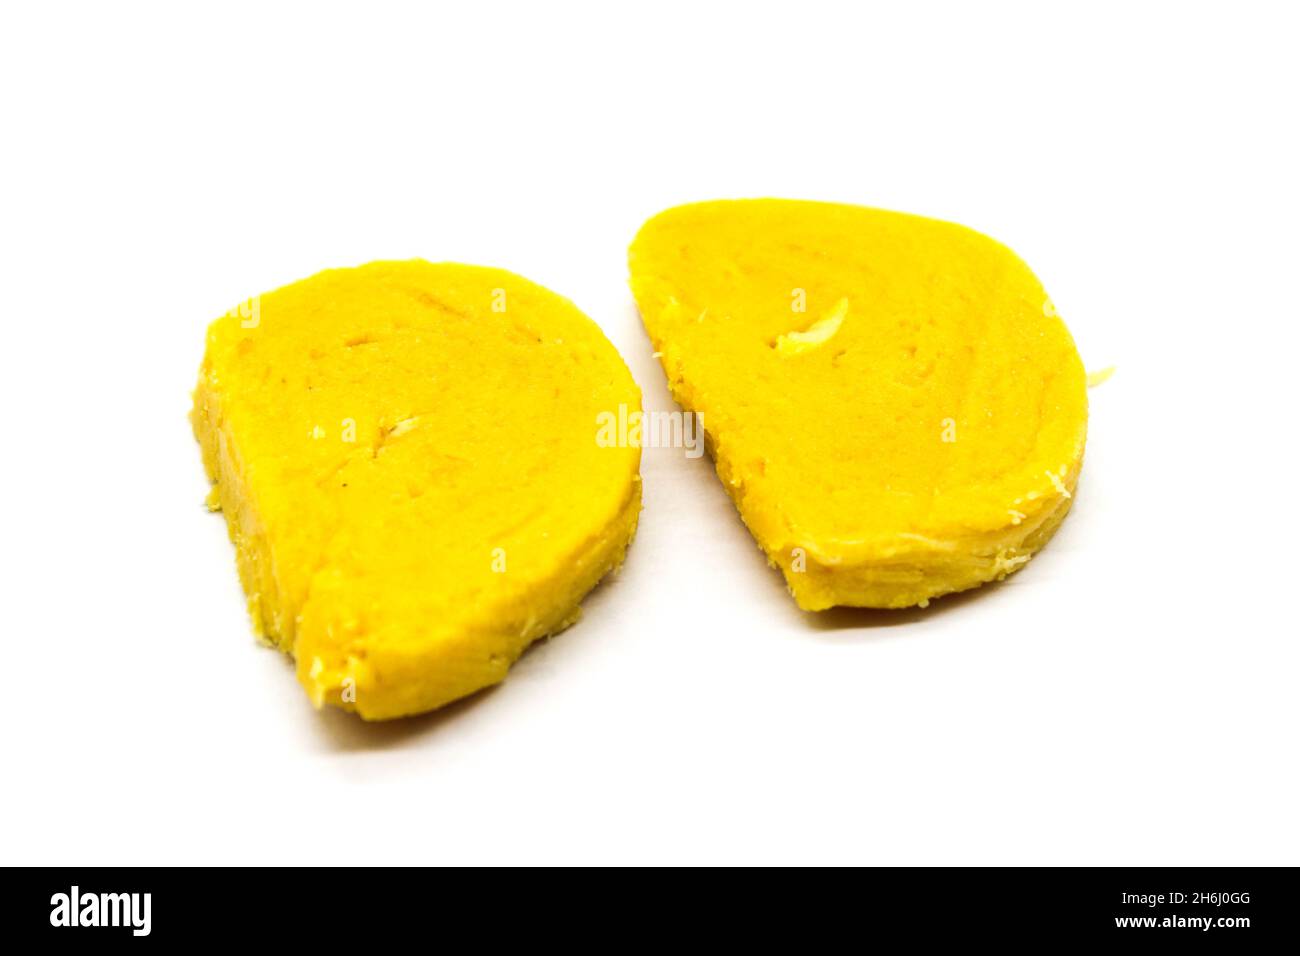 Gram flour sweets on white background with selective focus Stock Photo